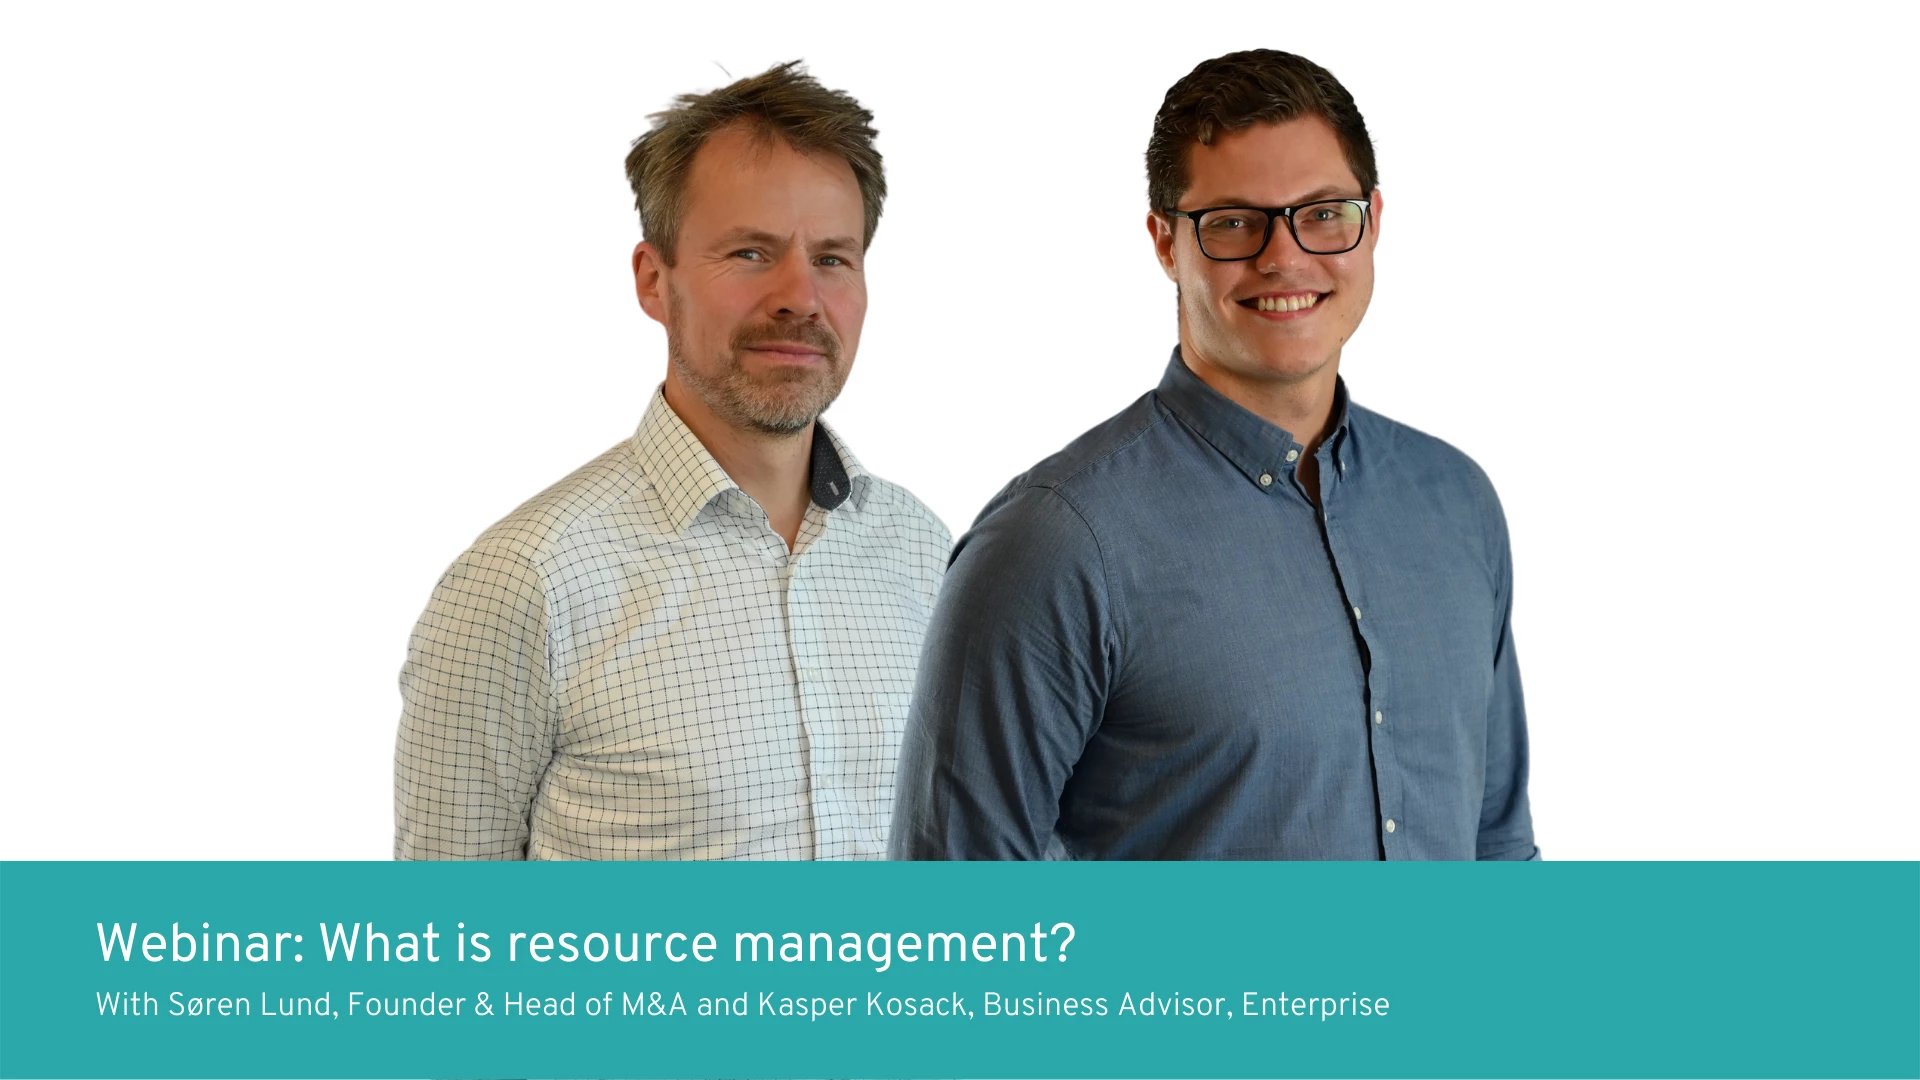 webinar-what-is-resource-management-with-soeren-lund-founder-head-of-ma-and-kasper-kosack-business-advisor-enterprise-1920-1080-px